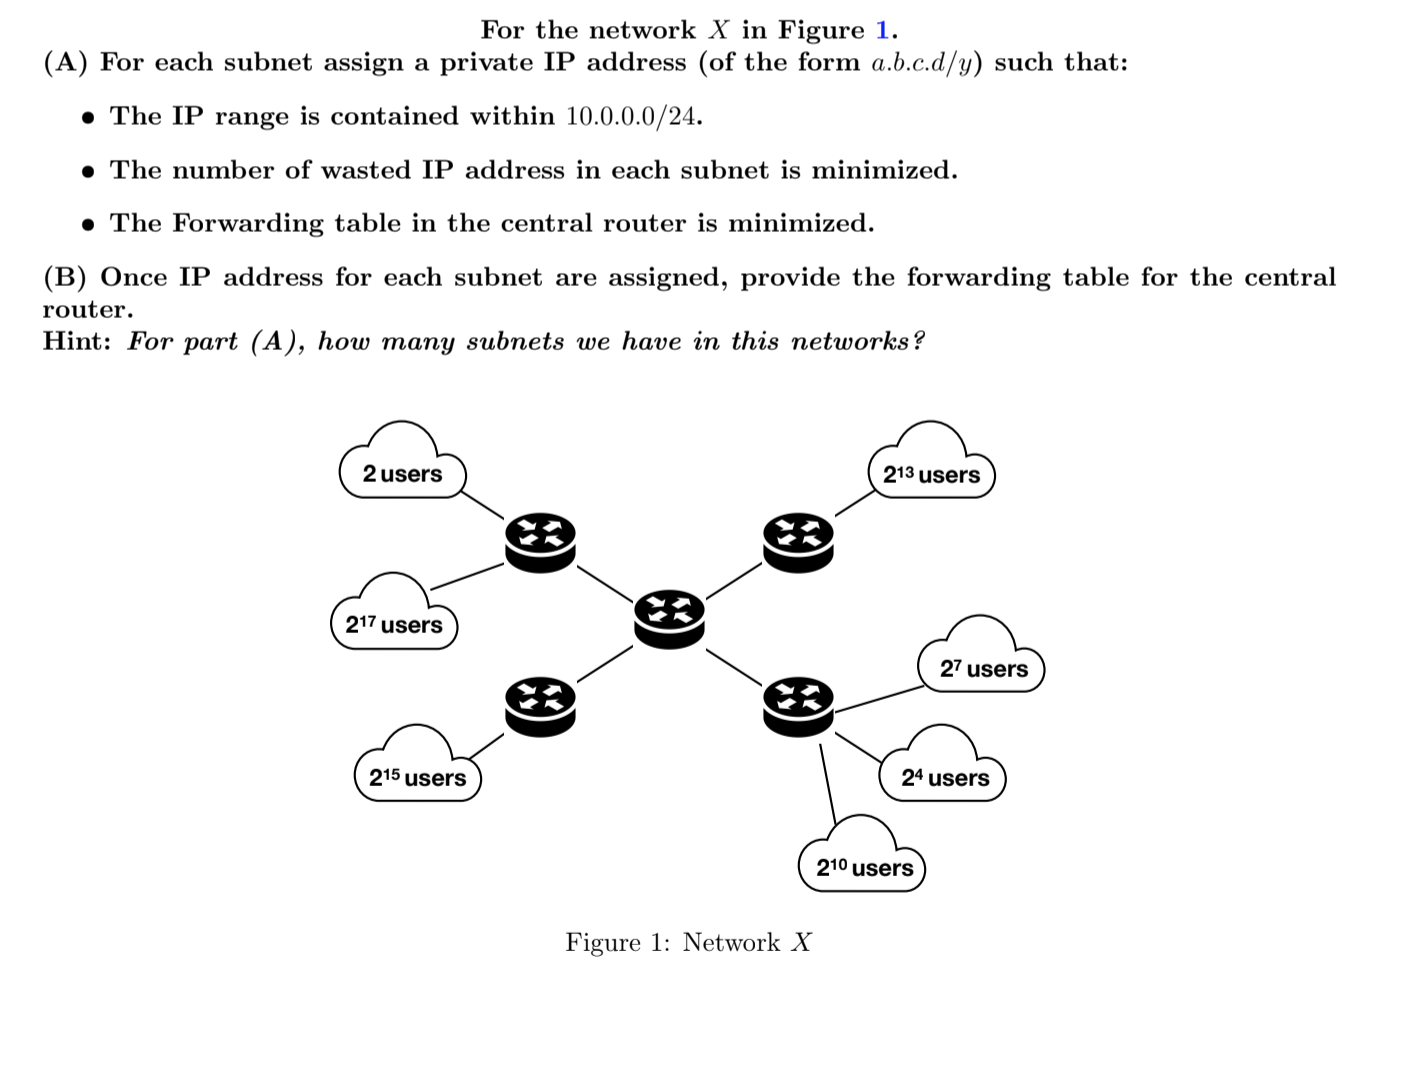 For the network X in Figure 1.
(A) For each subnet assign a private IP address (of the form a.b.c.d/y) such that:
The IP range is contained within 10.0.0.0/24.
The number of wasted IP address in each subnet is minimized.
The Forwarding table in the central router is minimized.
(B) Once IP address for each subnet are assigned, provide the forwarding table for the central
router
Hint: For part (A), how many subnets we have in this networks?
2 users
213 users
217 users
27 users
215 users
24 users
210 users
Figure 1: Network X
